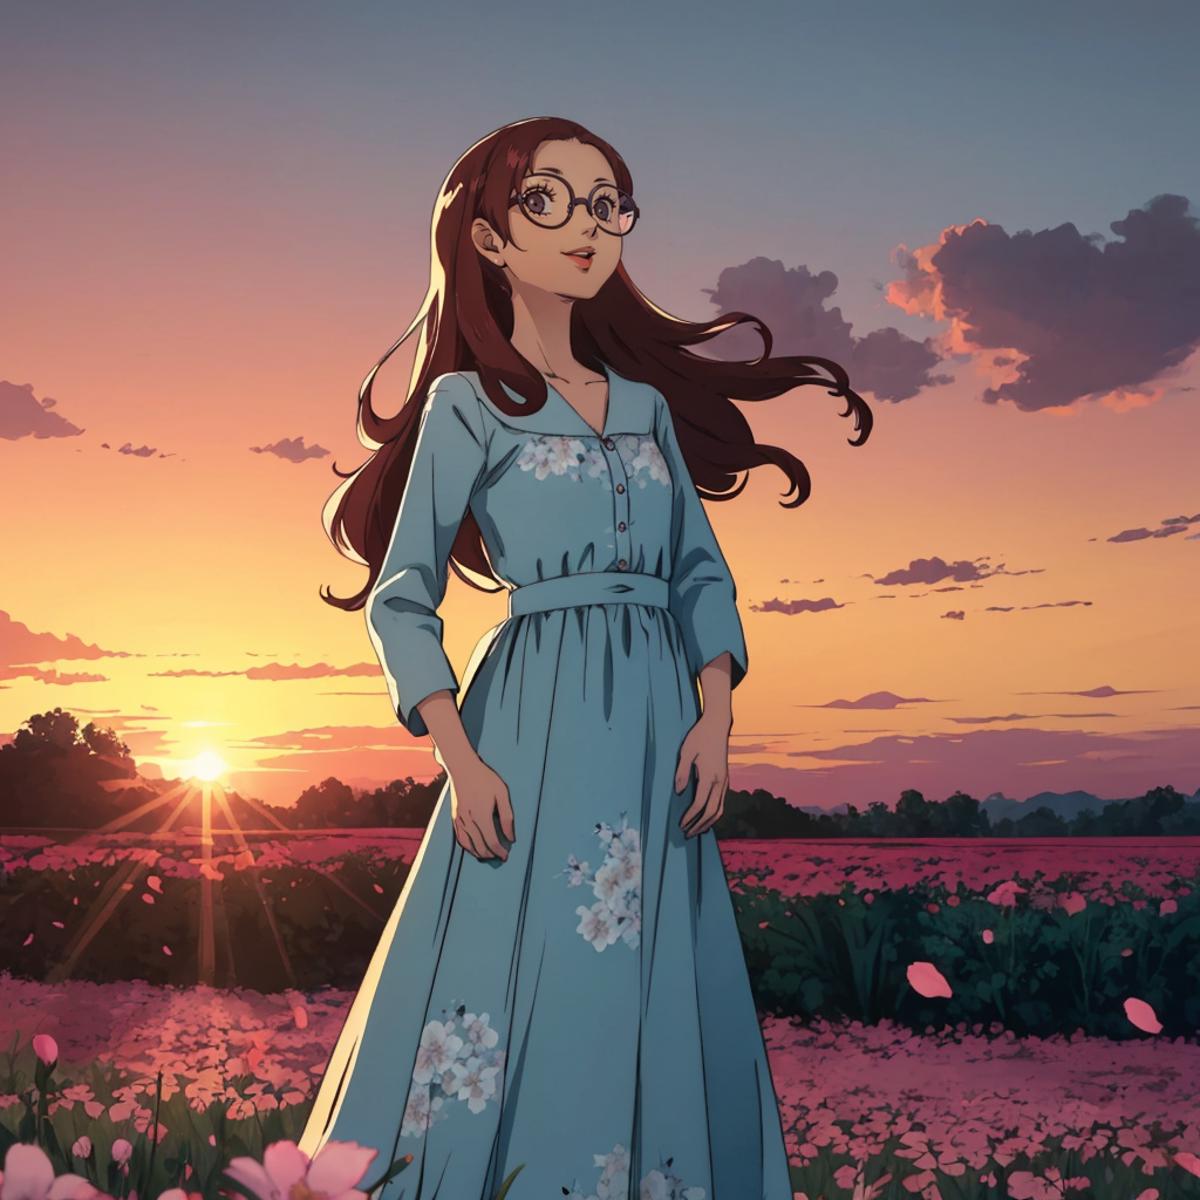 Anime girl standing in a field of flowers at sunset.